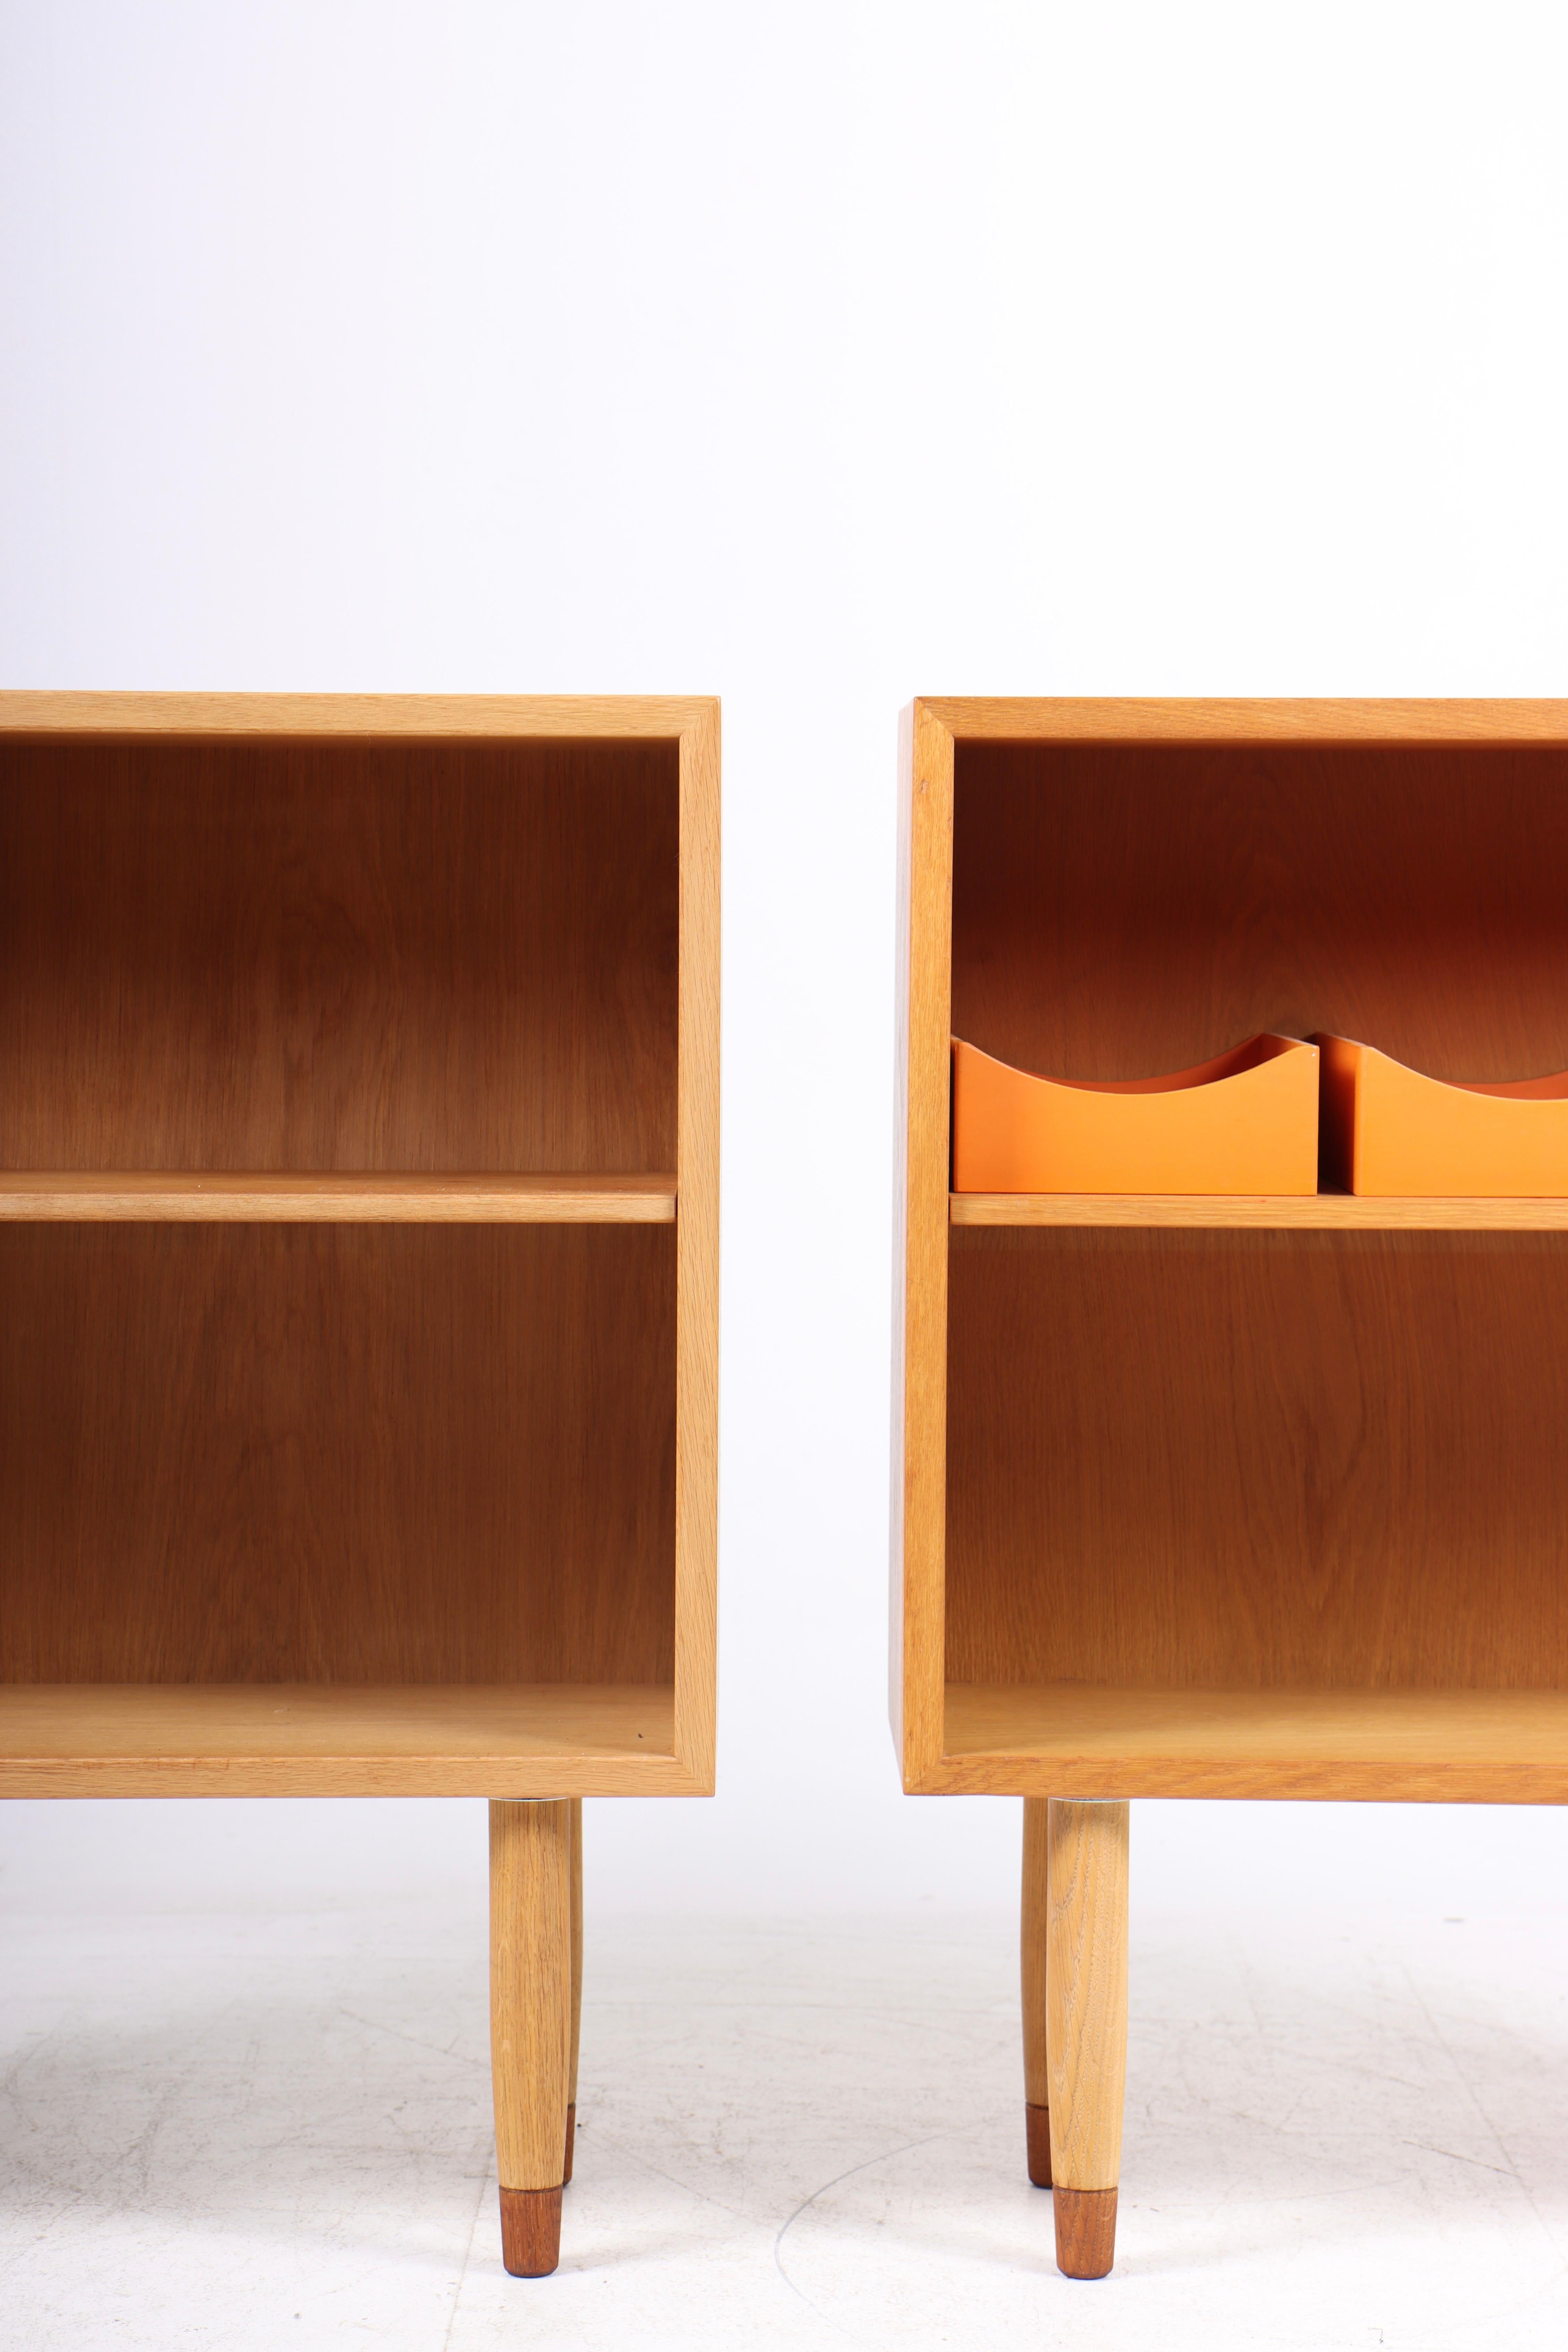 Pair of nightstands in oak with adjustable shelves. Designed by Danish architect Børge Mogensen for Karl Andersson cabinetmakers. Made in Sweden in the 1960s. Great condition.